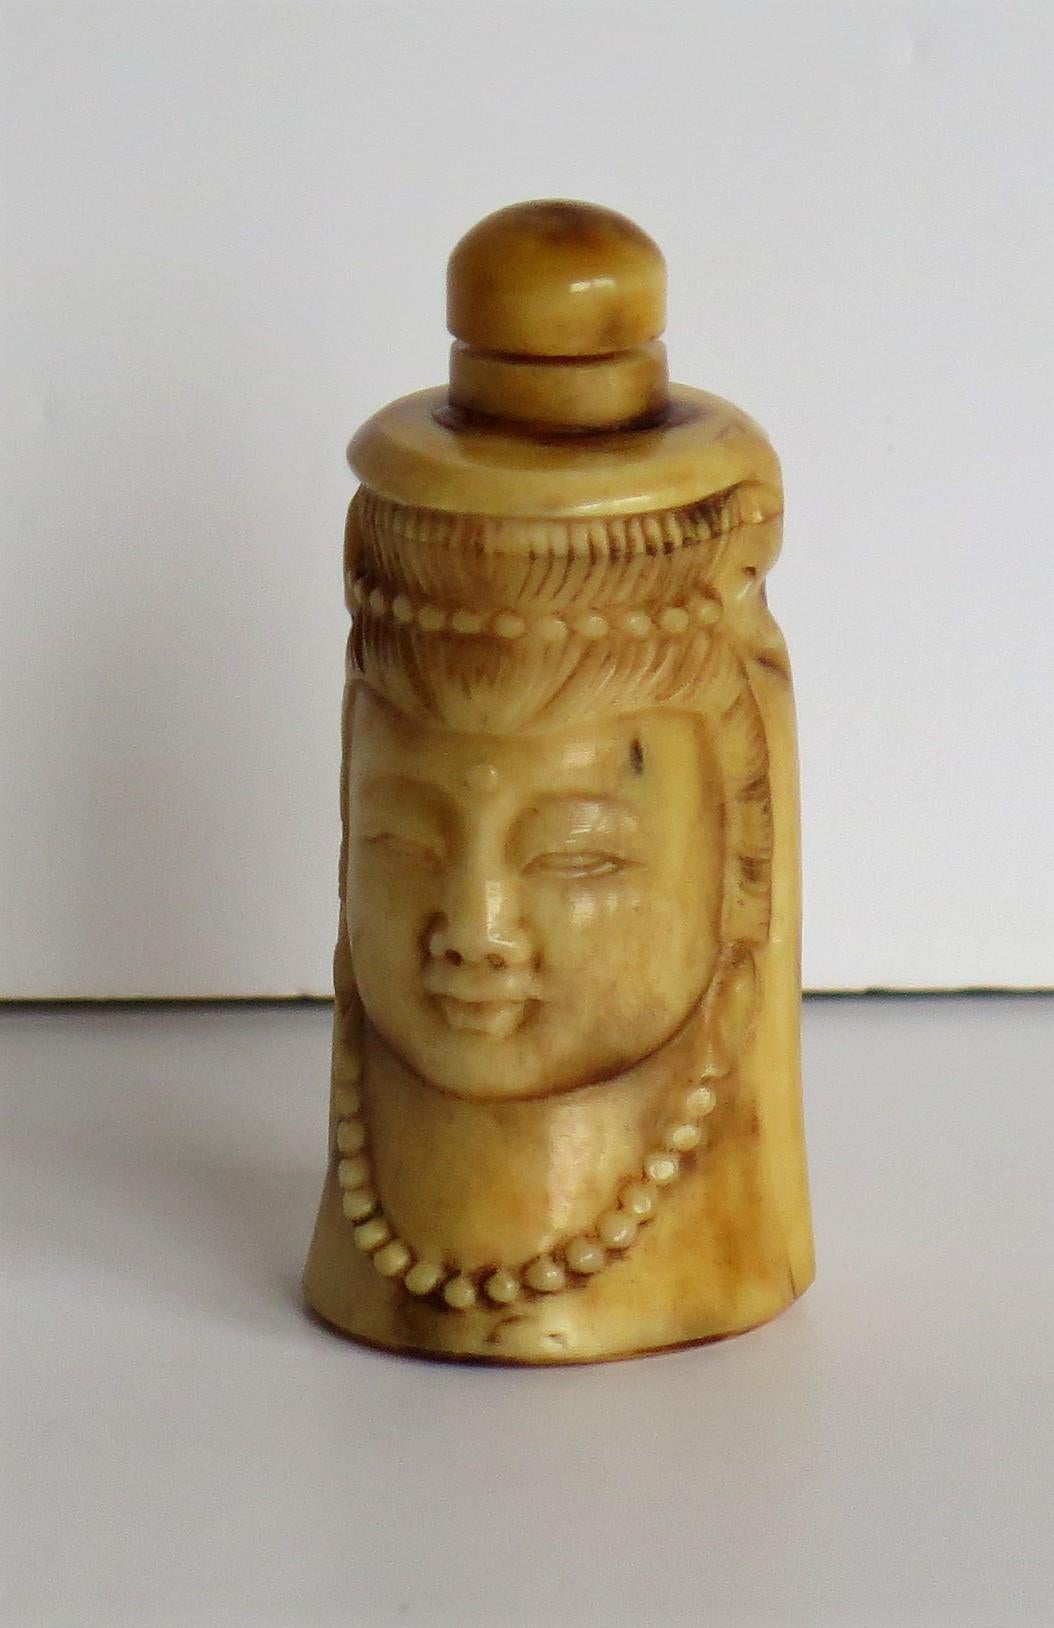 This is a very good Chinese hand carved Bone Snuff Bottle depicting Guanyin which is an East Asian Buddhist Deity. We date this piece to the earlier part of the 20th century, circa 1930s. 

The bottle is made of bovine bone which has a